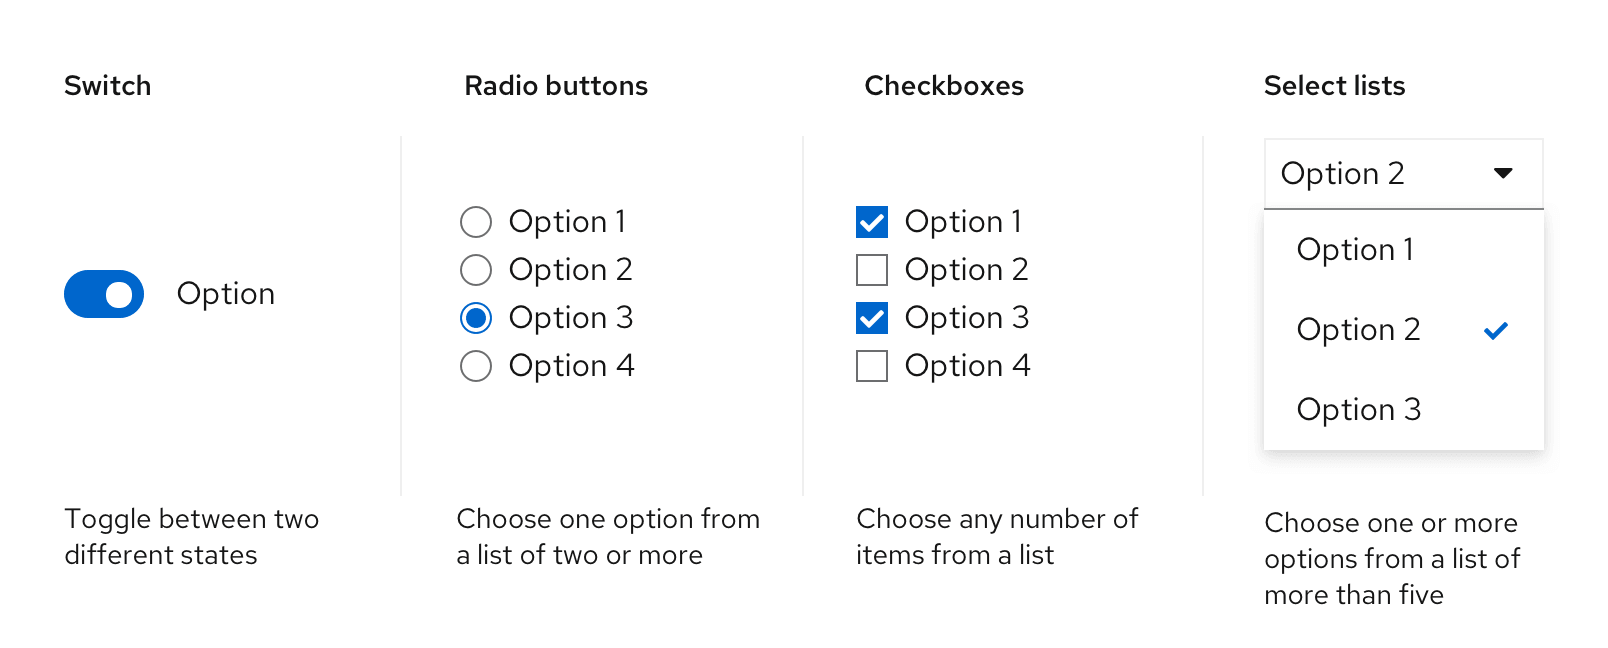 A visual representation of each data input type and their purpose: Switches for toggling between two states, radio buttons for choosing one option from multiple options, checkboxes for choosing any number of items from a list, and select lists for choosing one or more options from a list of more than five options